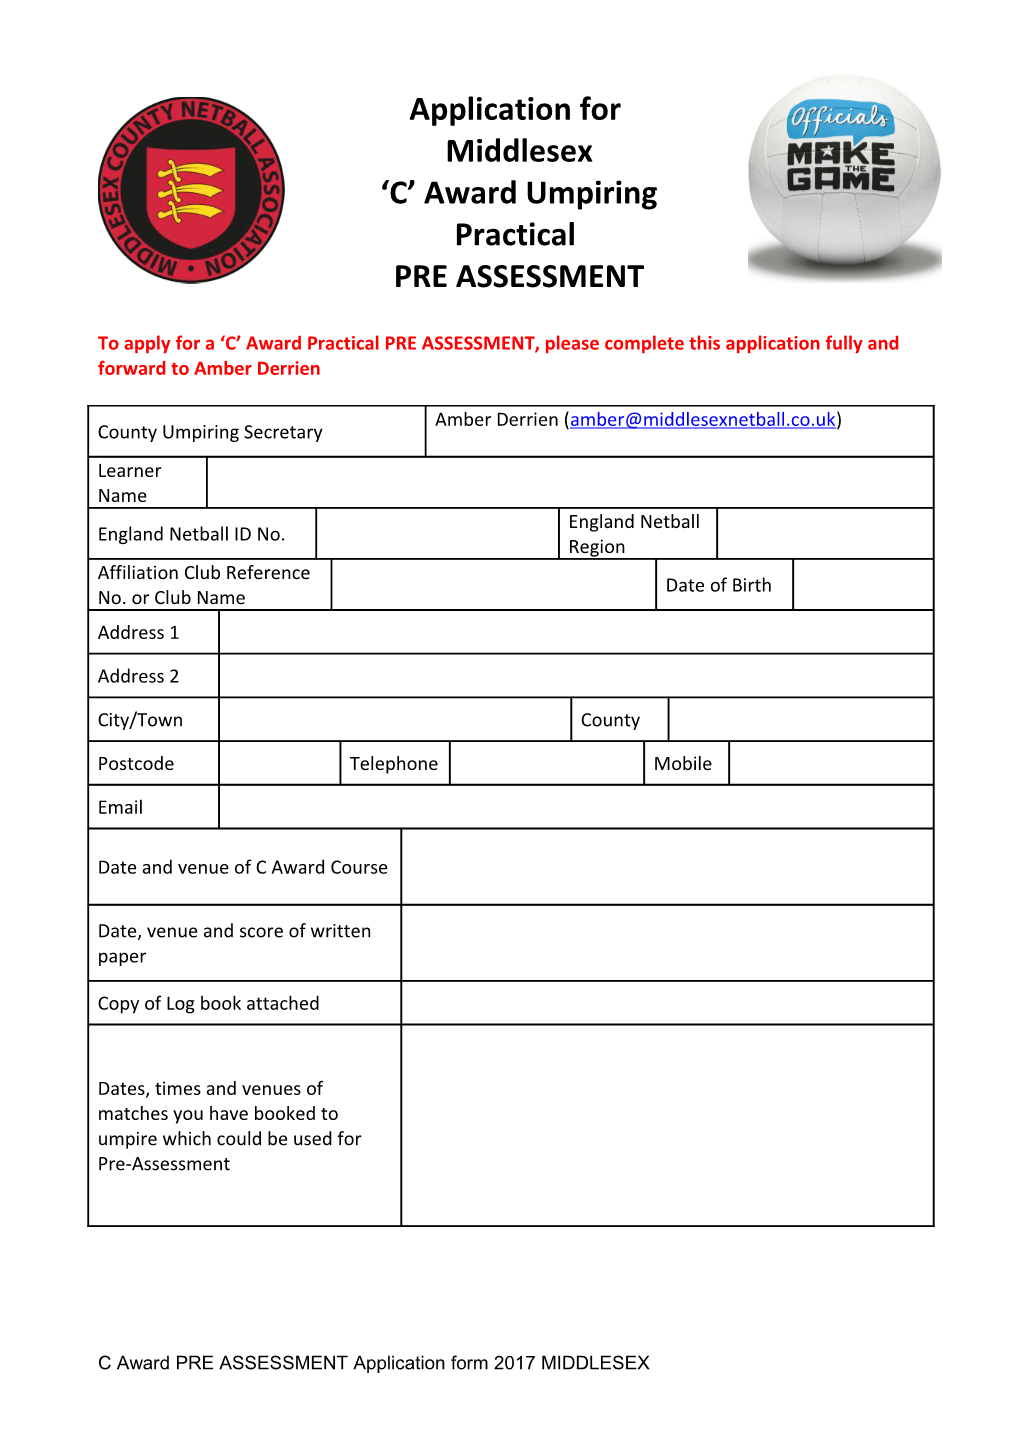 Requirements for Practical PRE Assessment